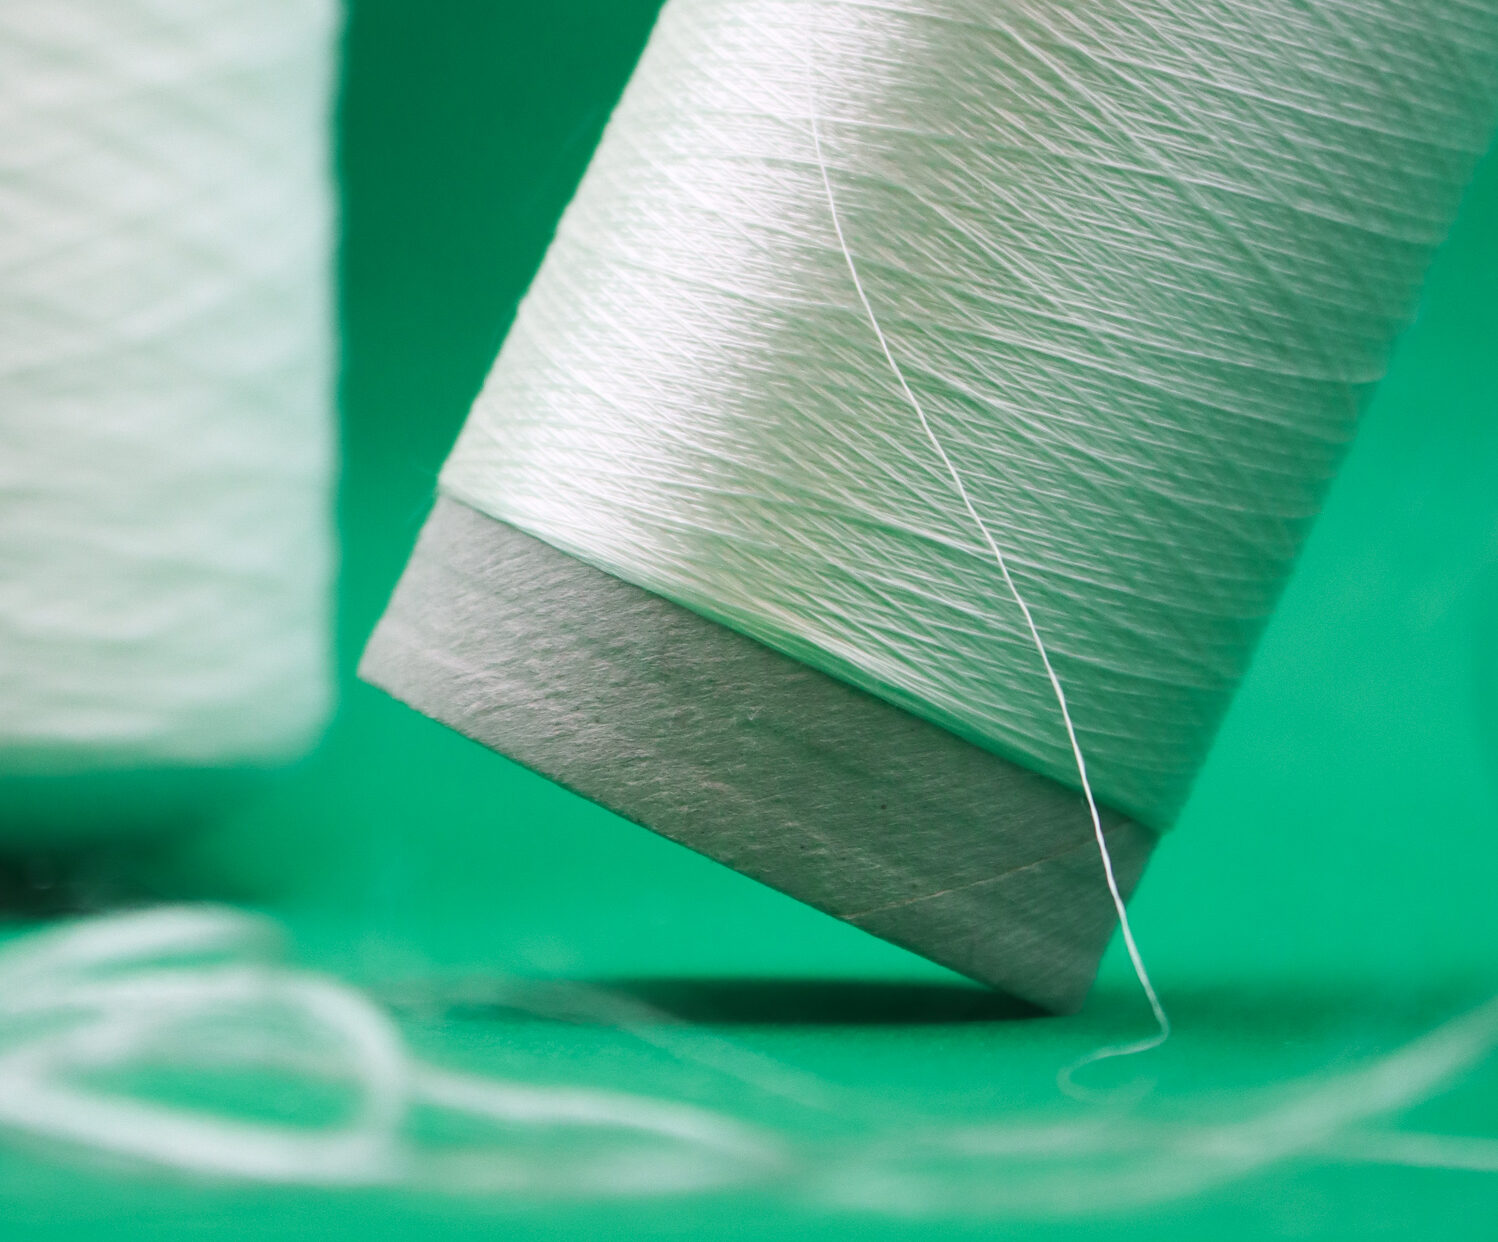 A spool of white AlgiKnit yarn on a green background. Keel Labs was formerly known as AlgiKnit.